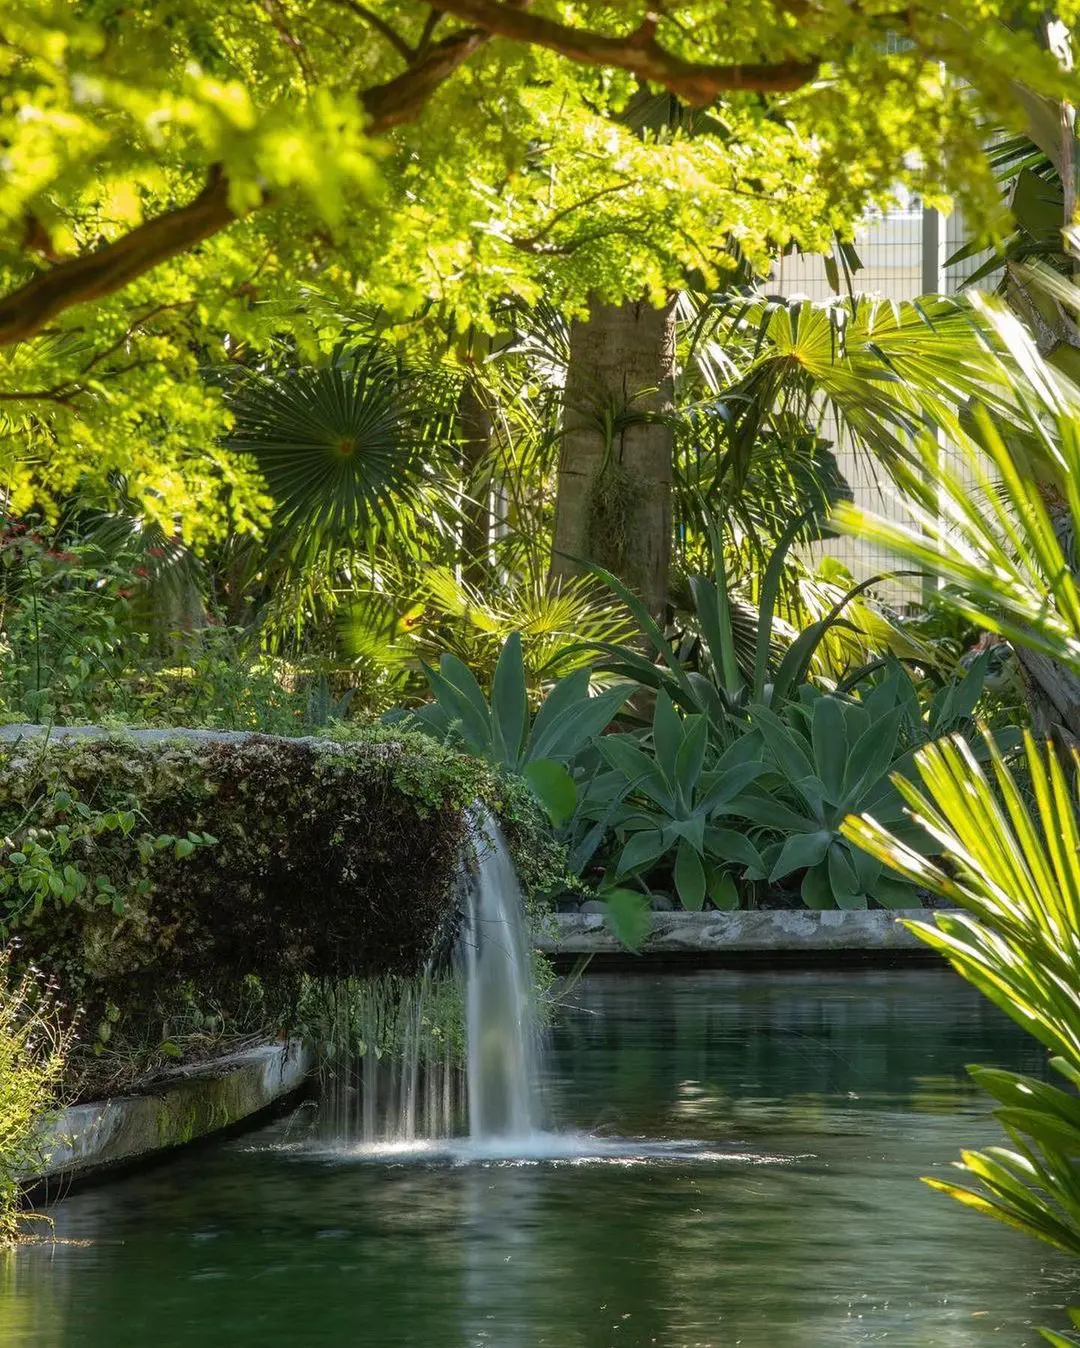  Miami Beach Botanical Garden is a place to feel the nature